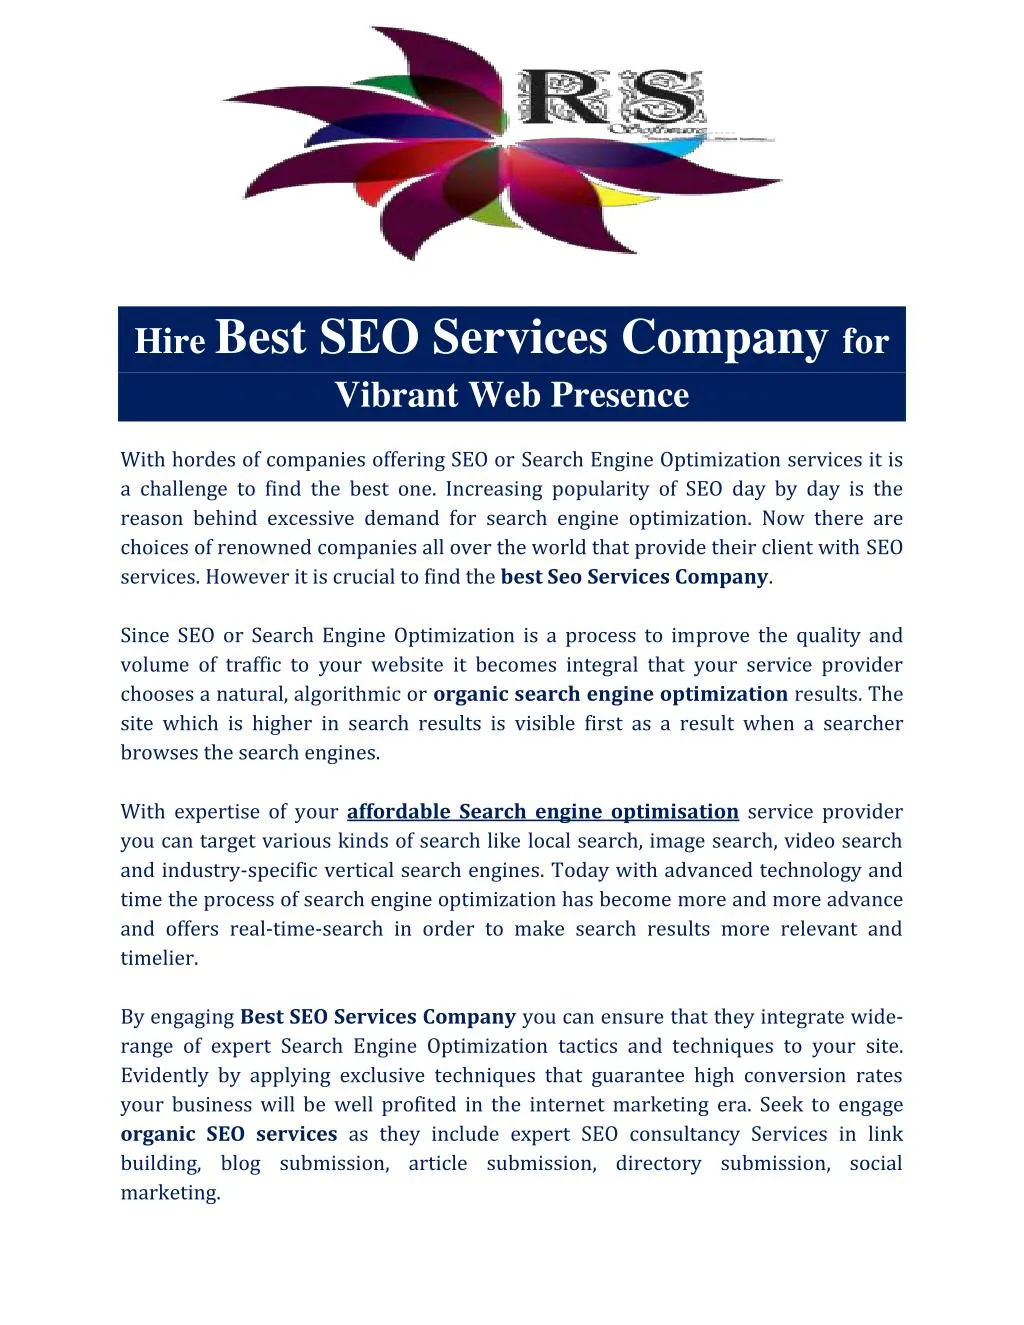 hire best seo services company for vibrant